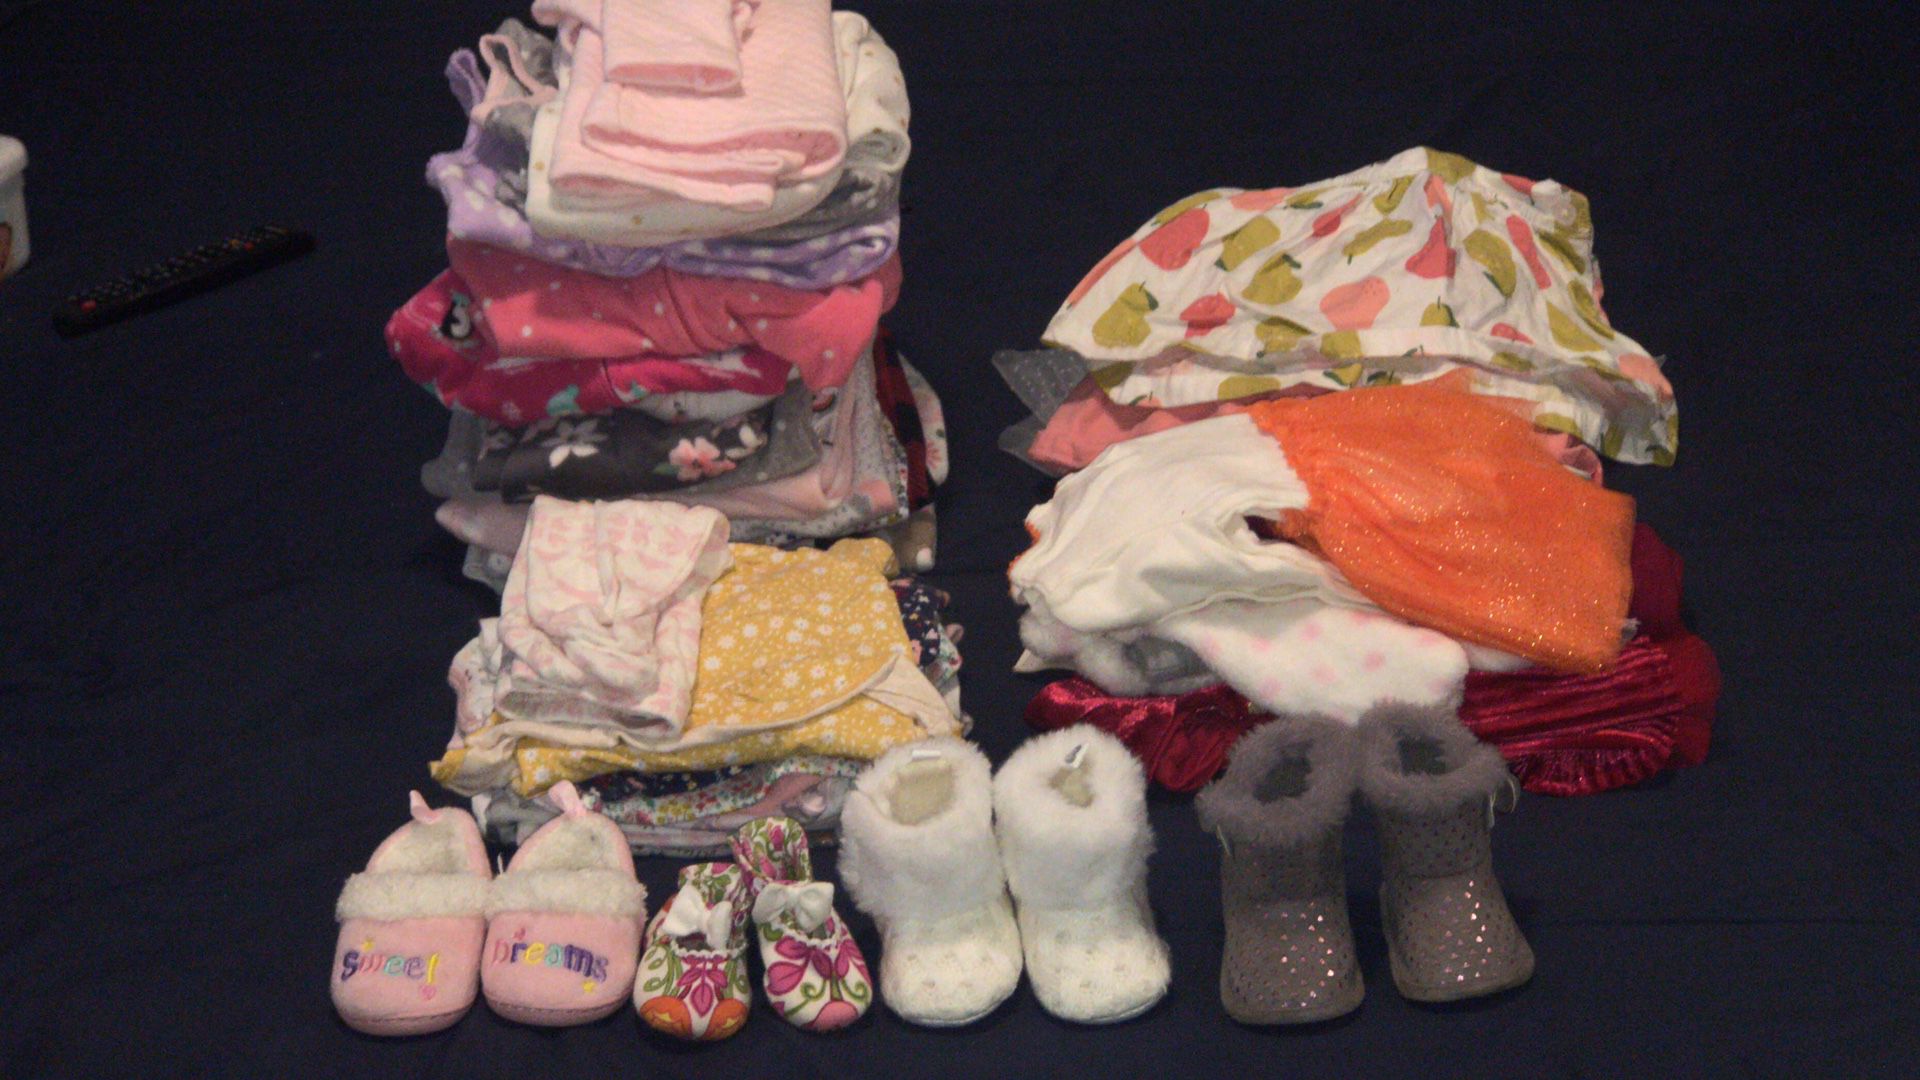 Newborn-12 Months Baby Clothes/shoes/toys/swing&jumper/ Baby Carrier/ Baby Bather